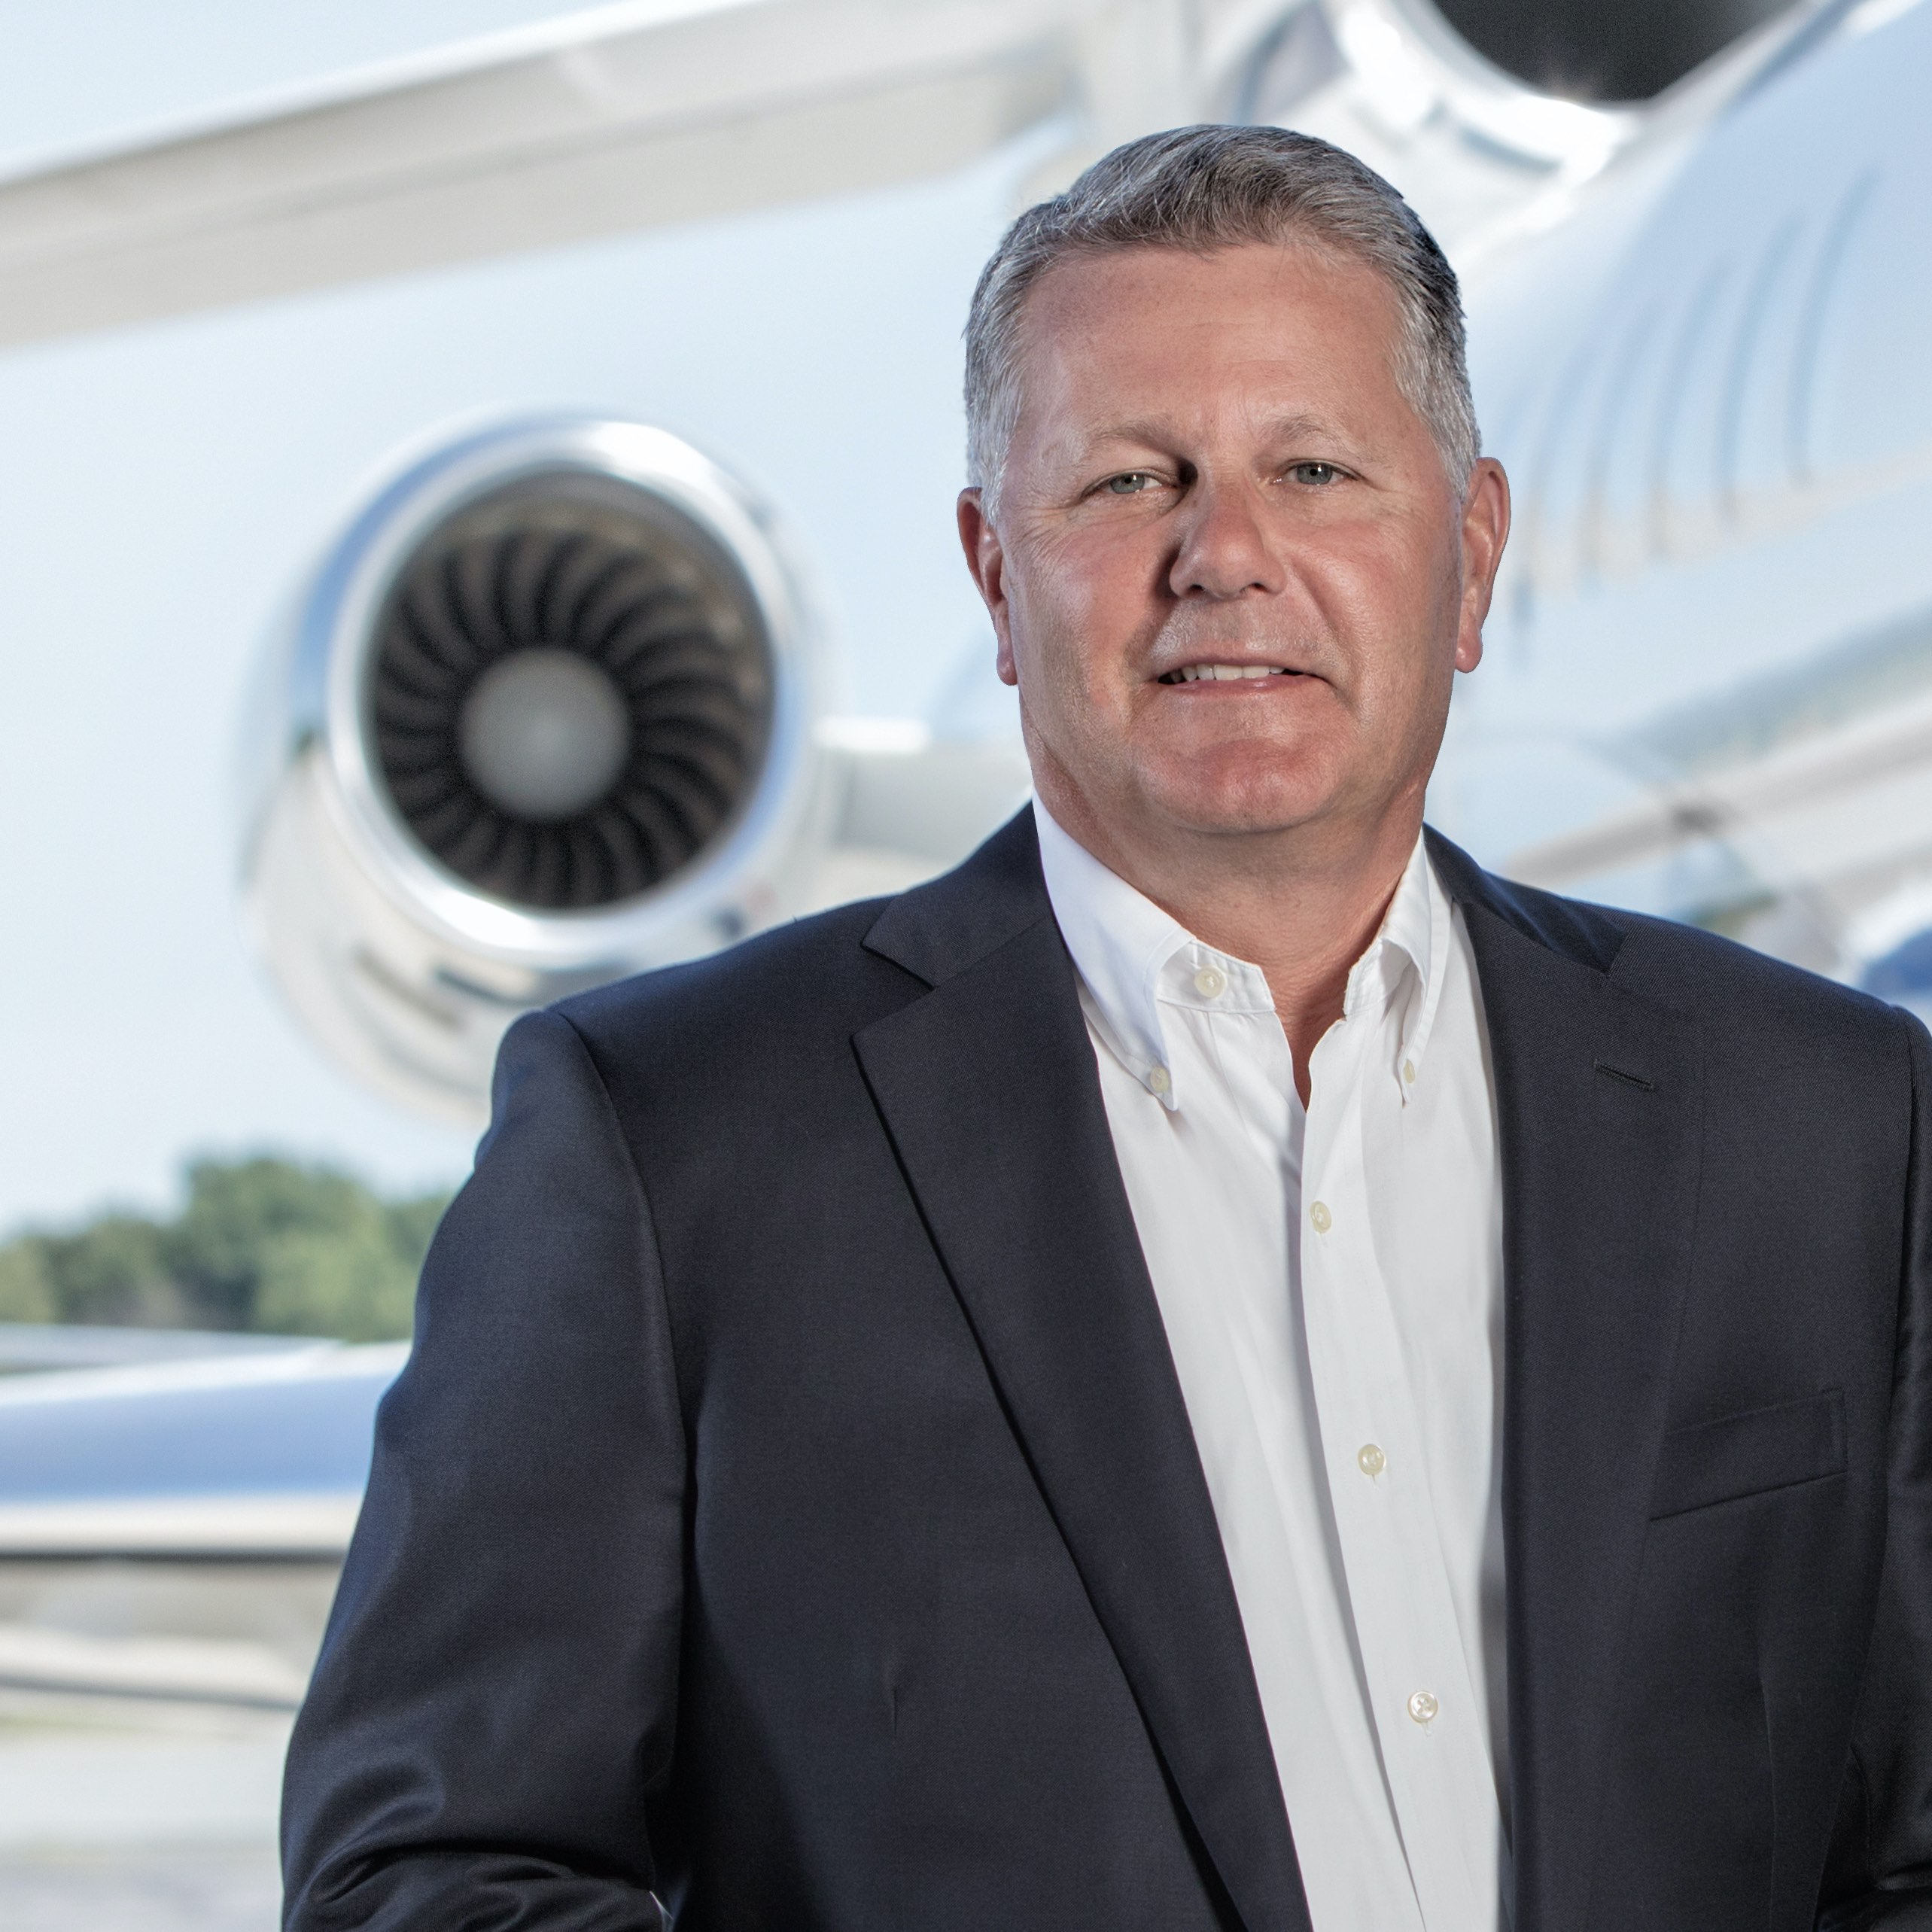 Shawn Vick, CEO of Global Jet Capital, stated, “We are very pleased with the outcome related to BJETS 2021-1, which is coming off the heels of the success we had with BJETS 2020-1."